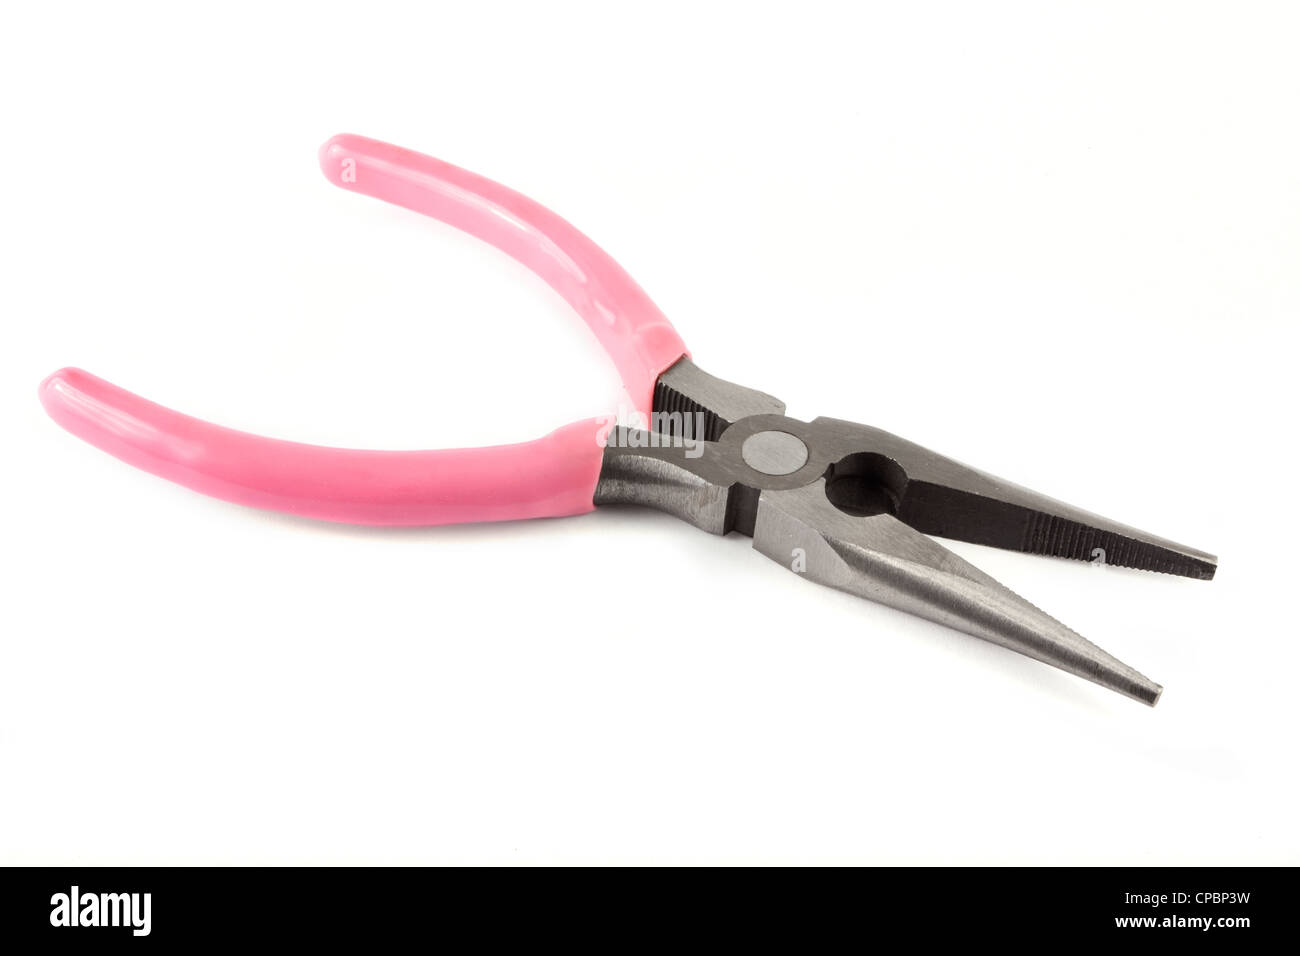 Pink pliers on a white background Stock Photo